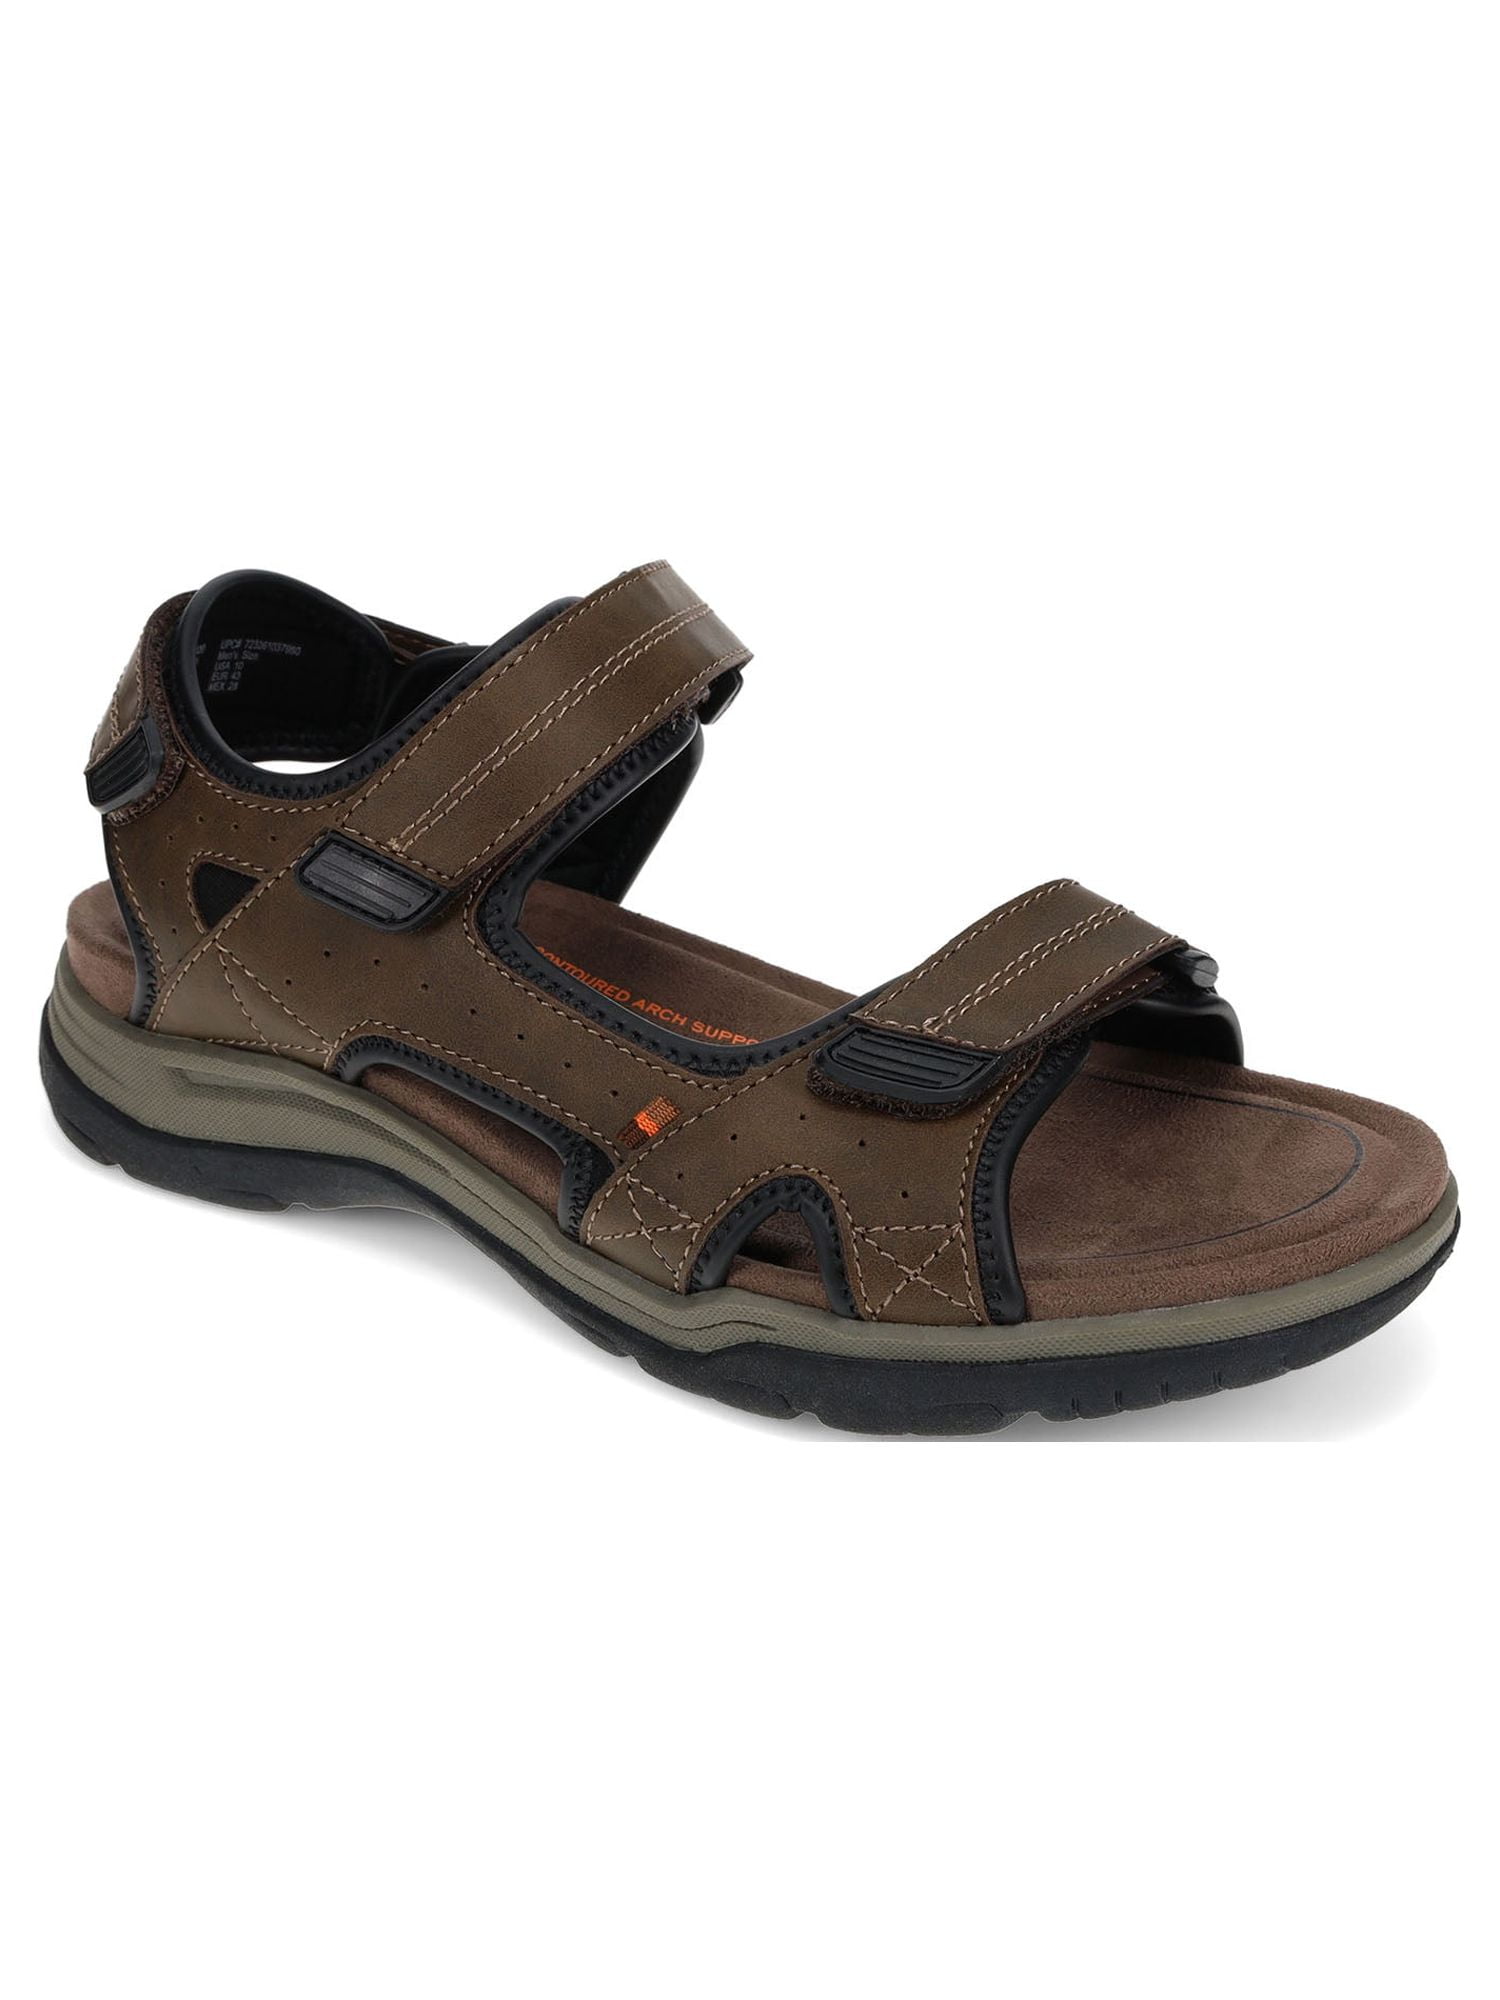 Fsports Desmond Series Black Lemon Casual Sandal for Men (Size : 12UK): Buy  Online at Low Prices in India - Amazon.in